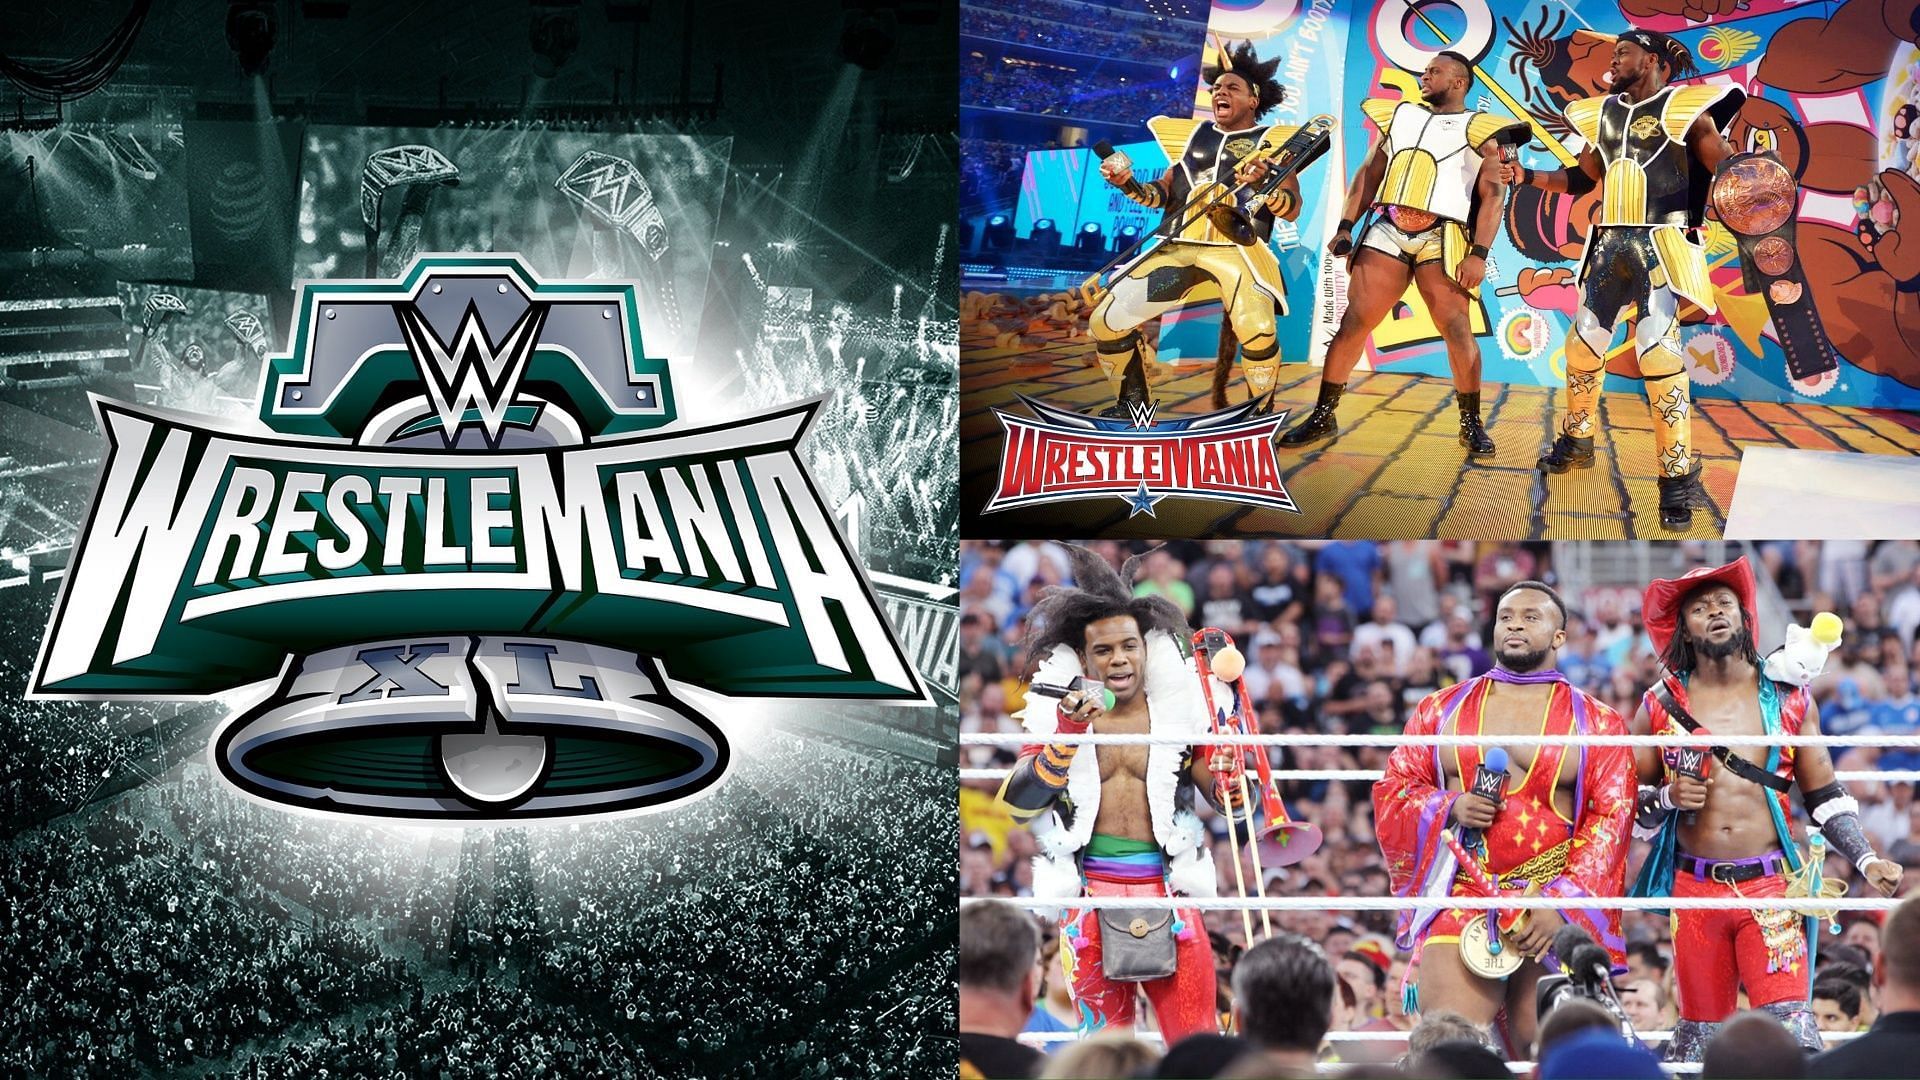 What role will The New Day play at WrestleMania XL?